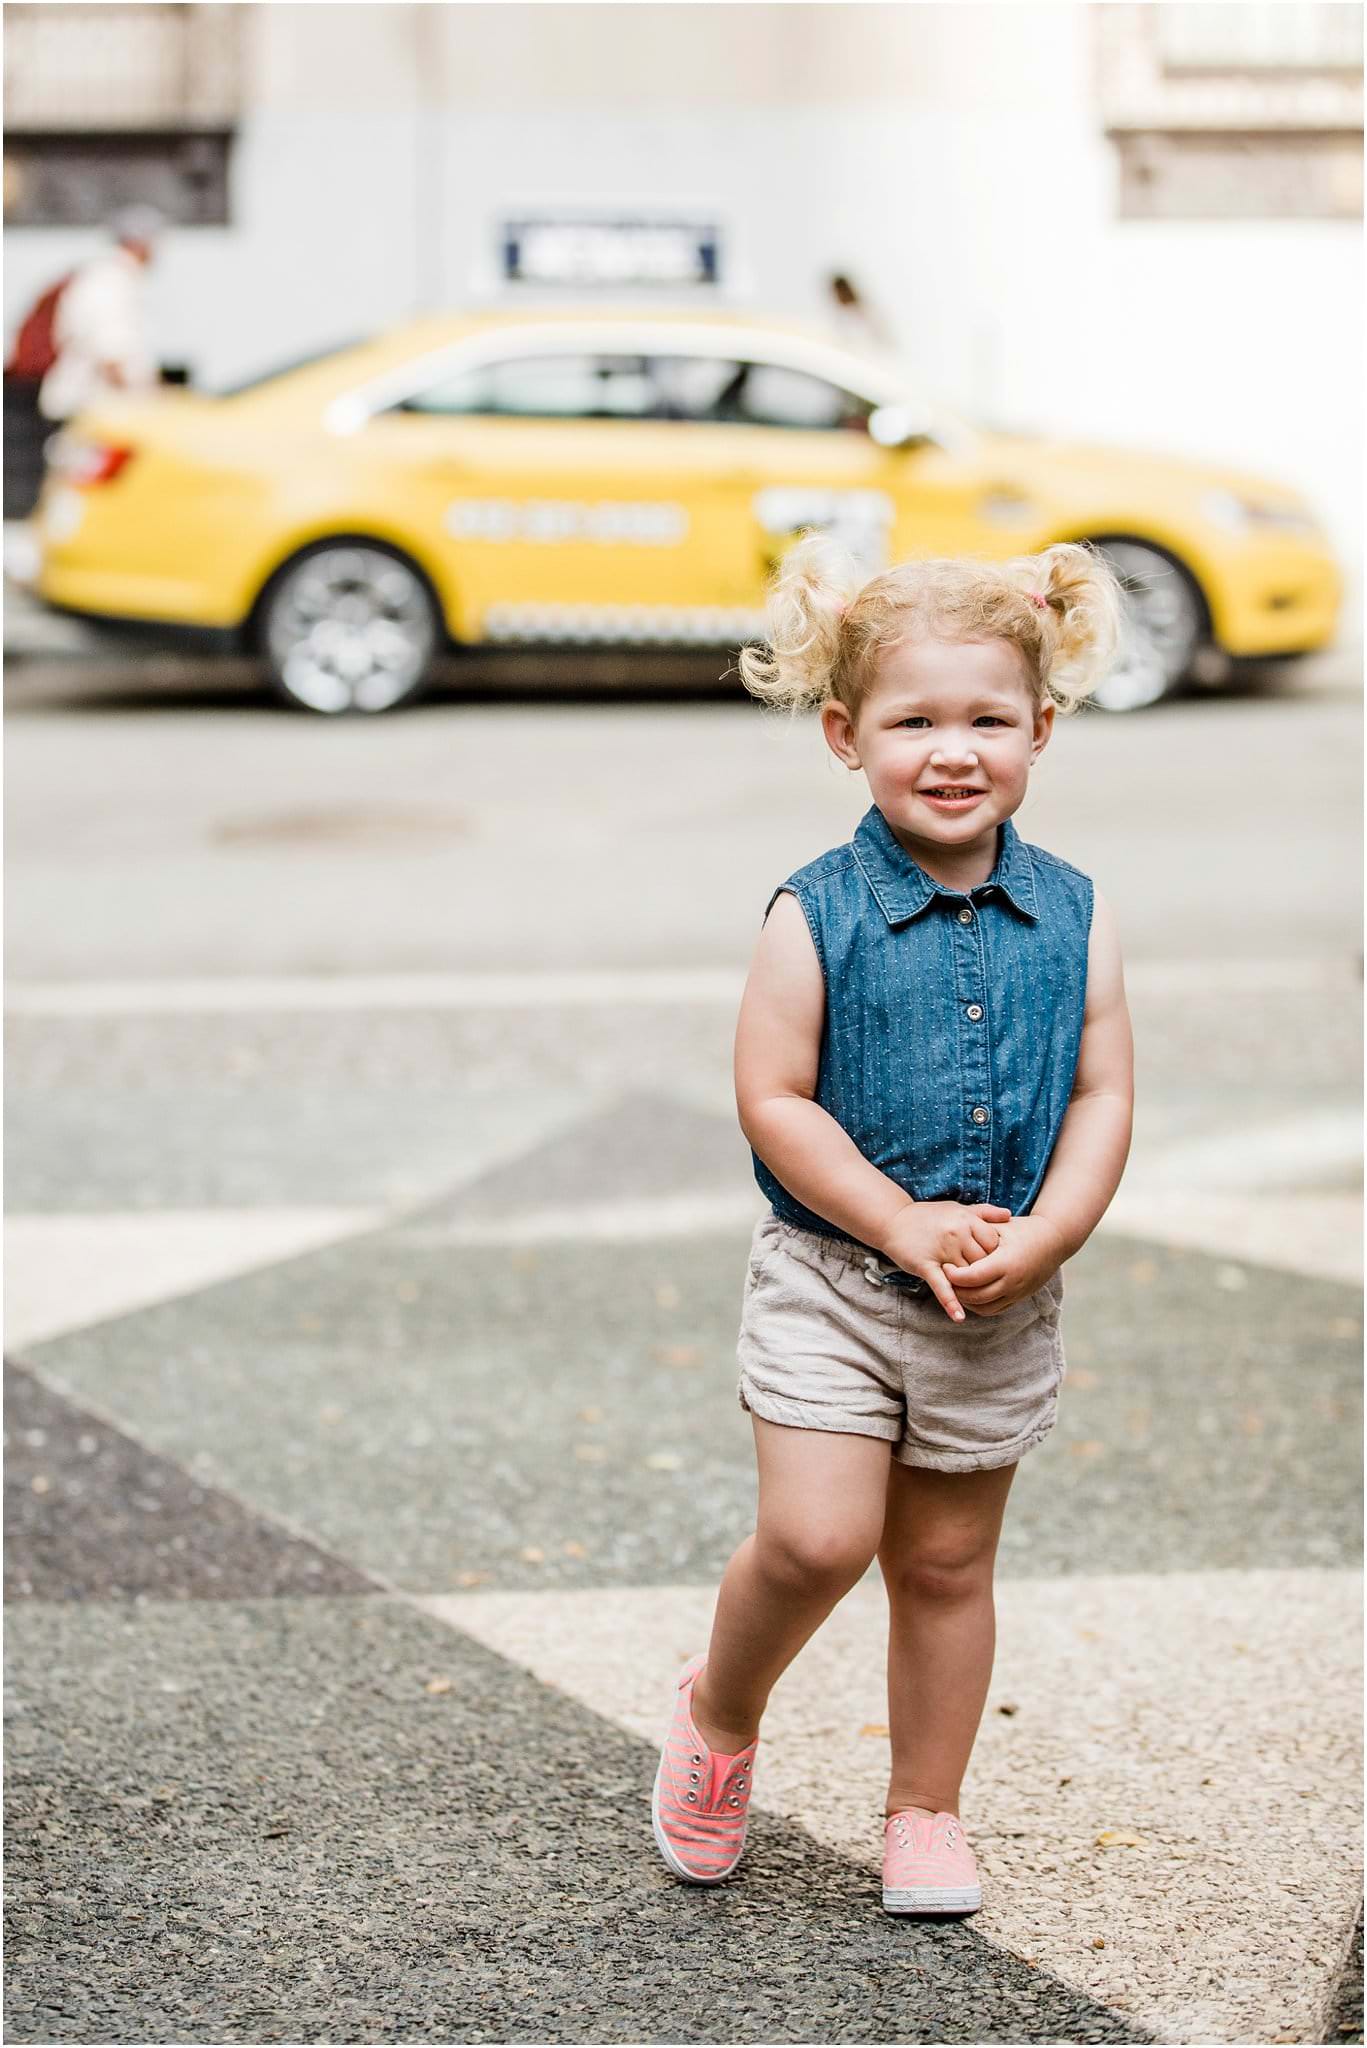 Little girl downtown in front of taxi